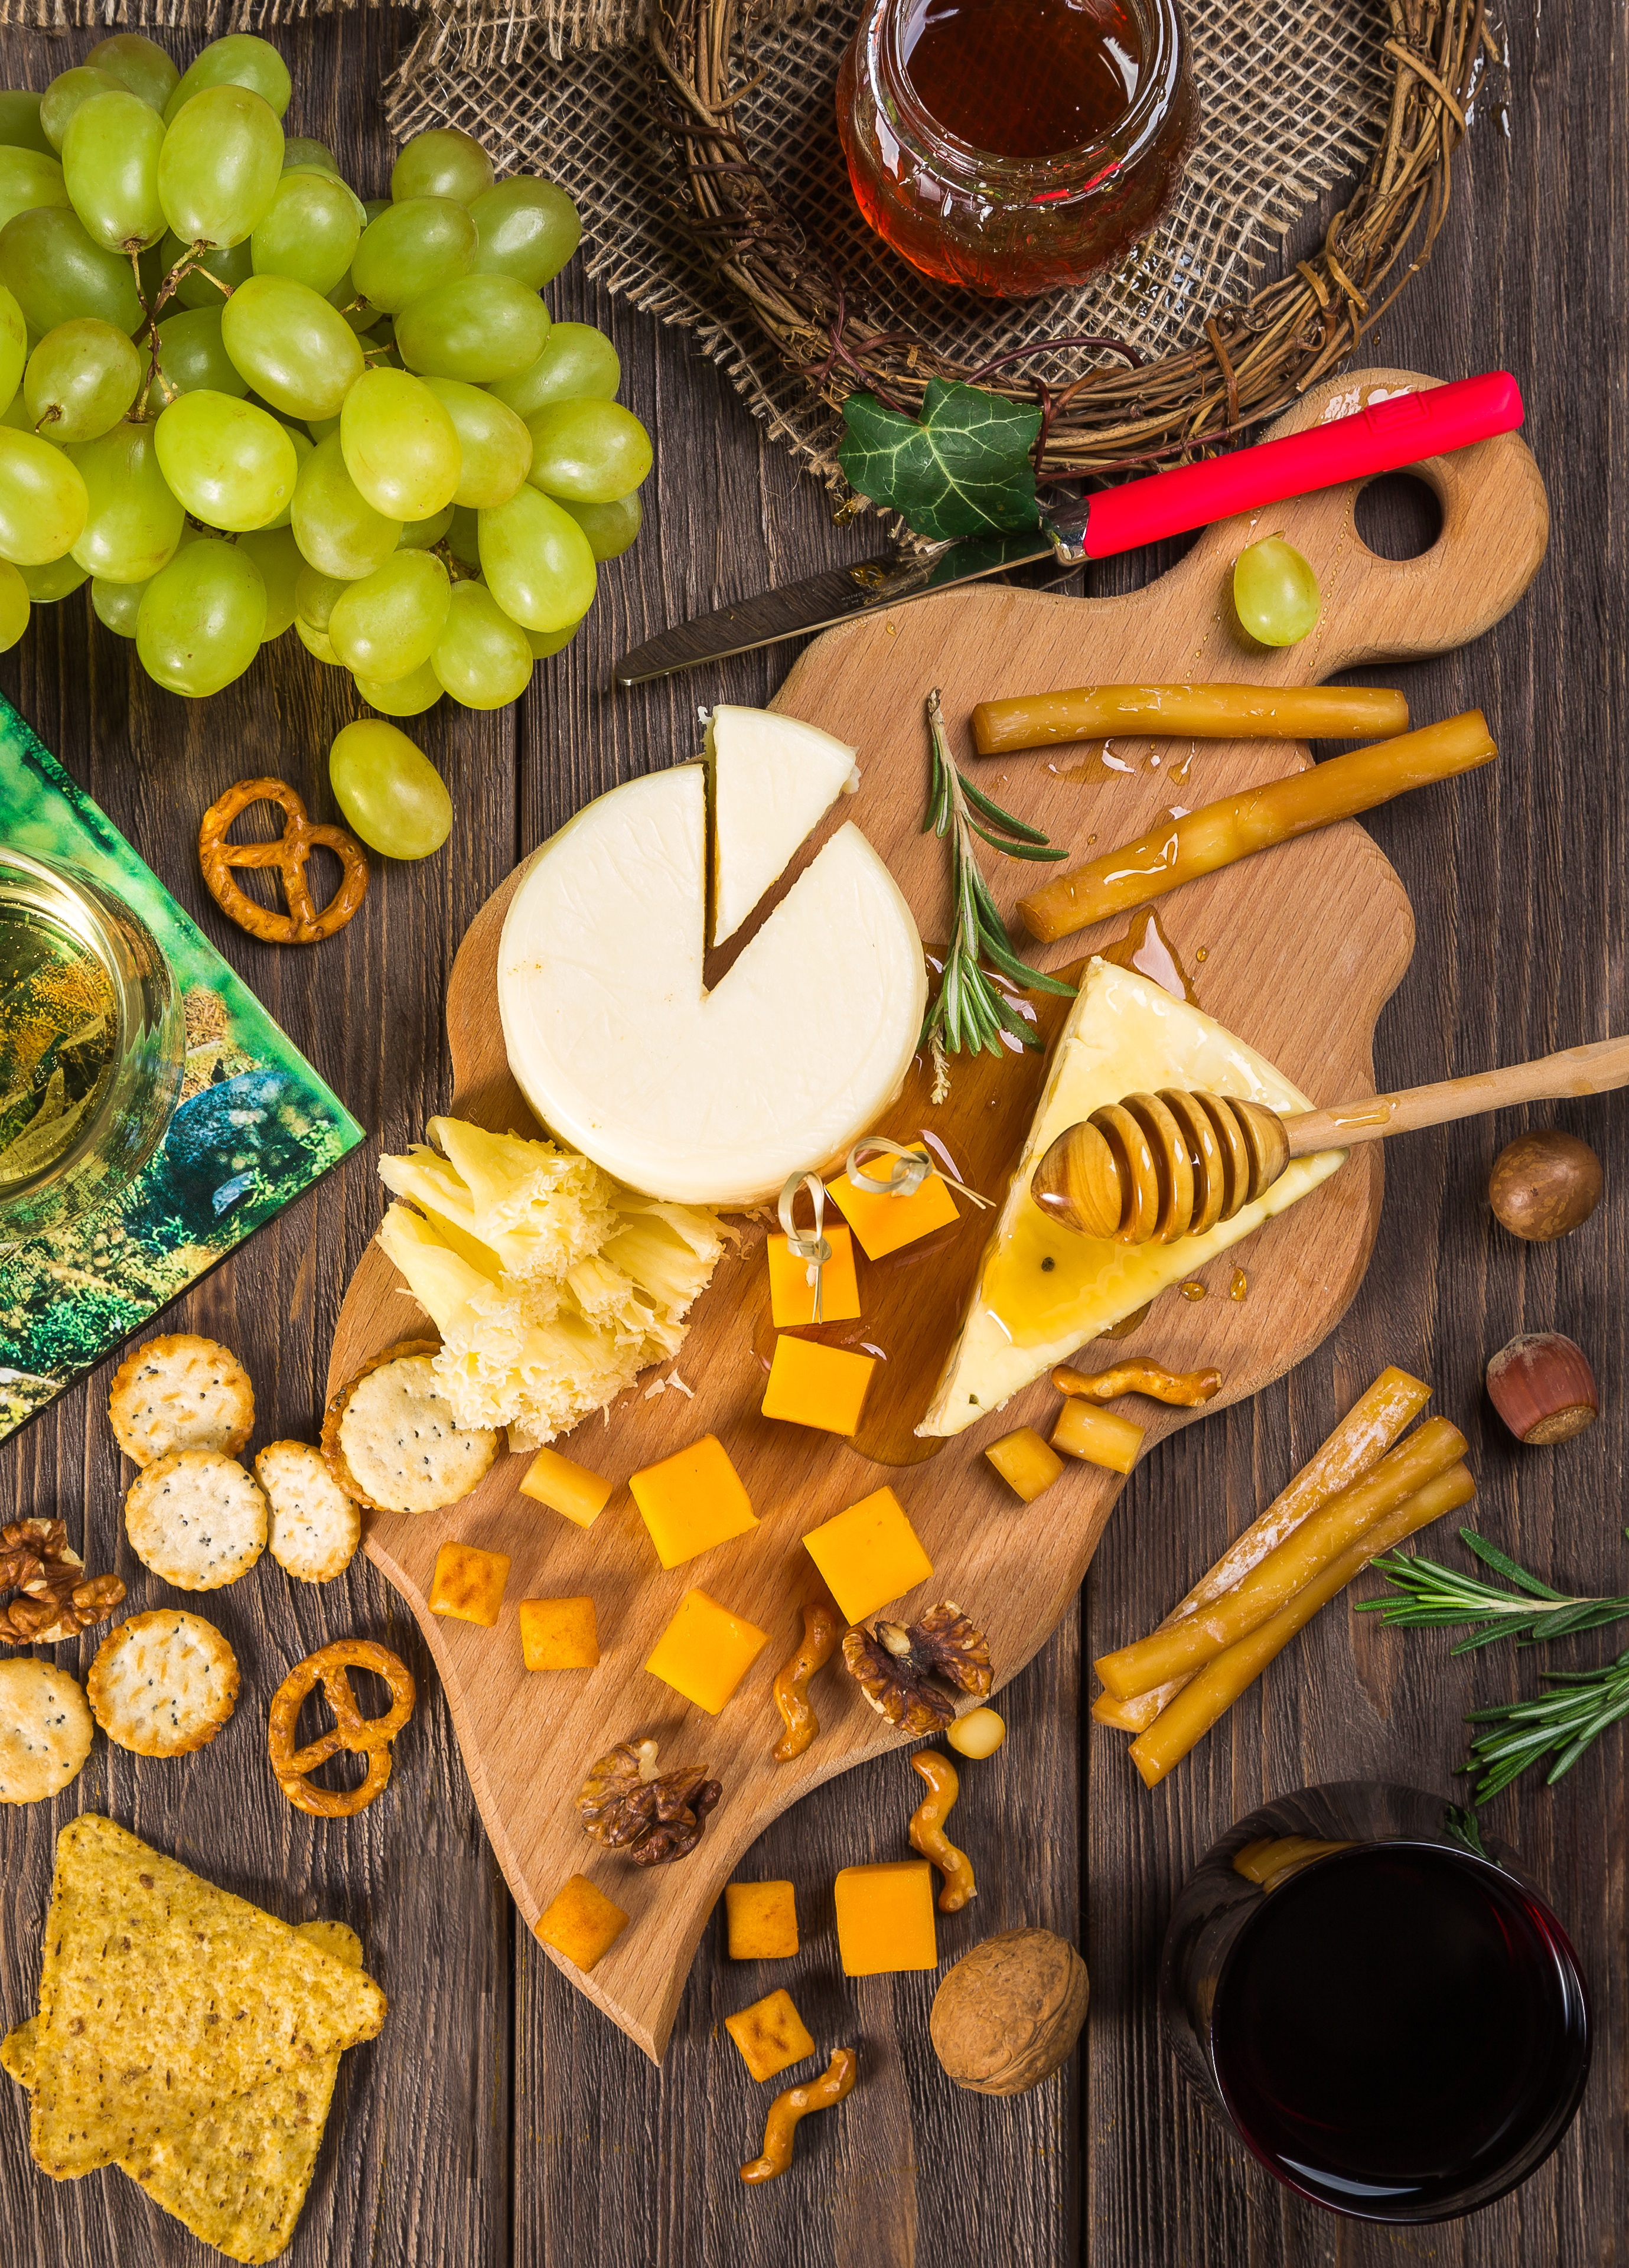 Holiday Cheese Plate, How to Make a Cheese Platter, Jarlsberg Cheese, Party Cheese Plate